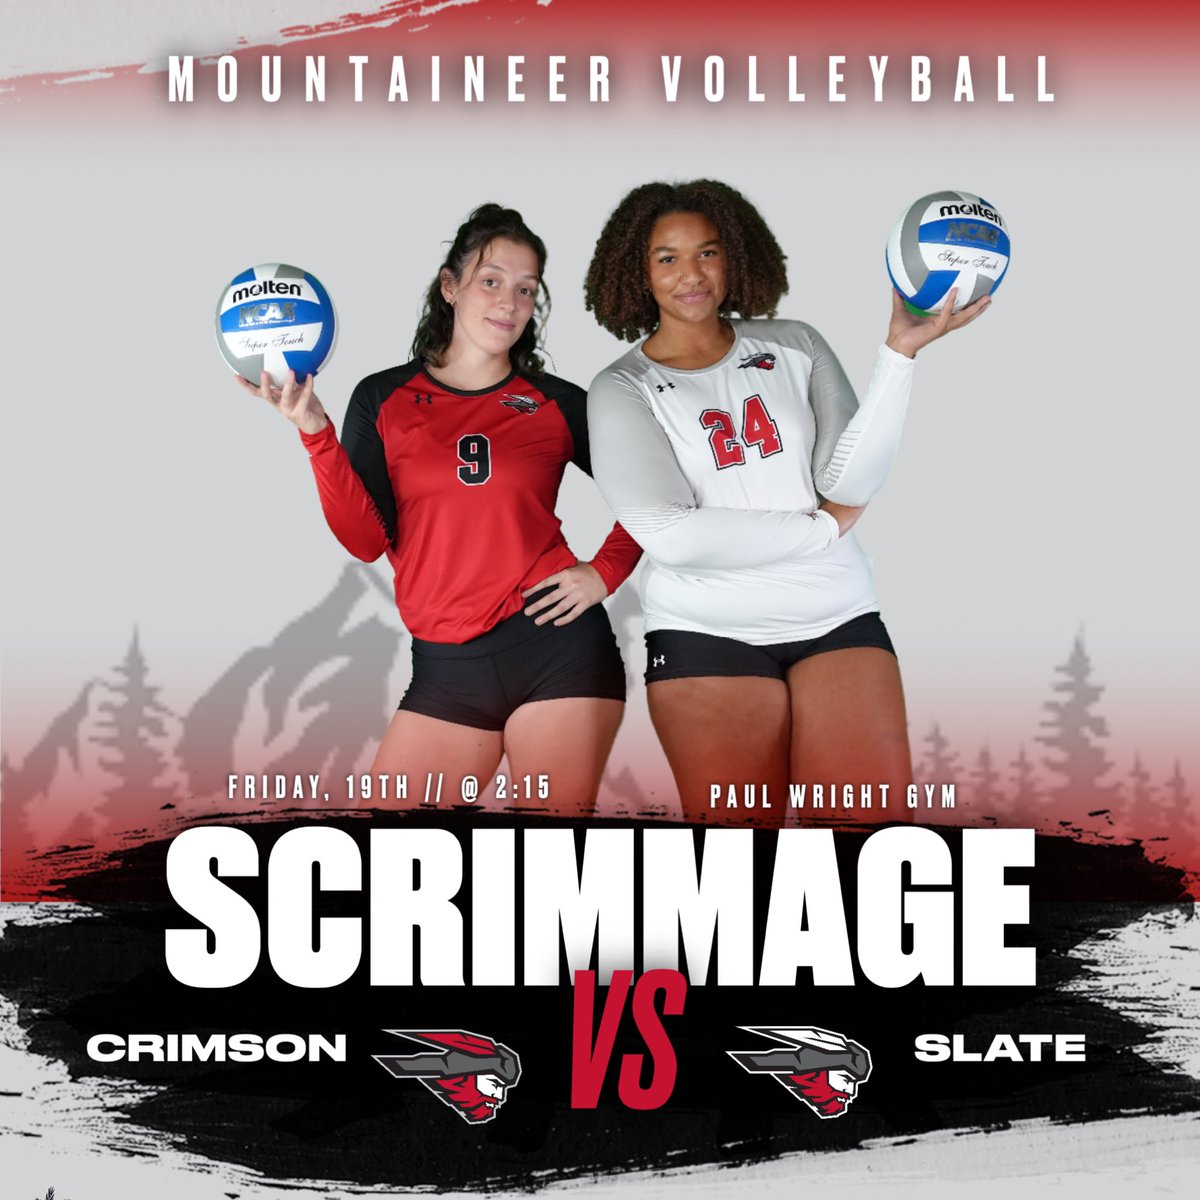 ‼️ CRIMSON vs SLATE ‼️

Last spring season scrimmage, come out and support Friday the 19th @ 2:15!

🔴WHO YOU GOT??⚪️
#mountaineervb #elevated #makeitcount #7723ft